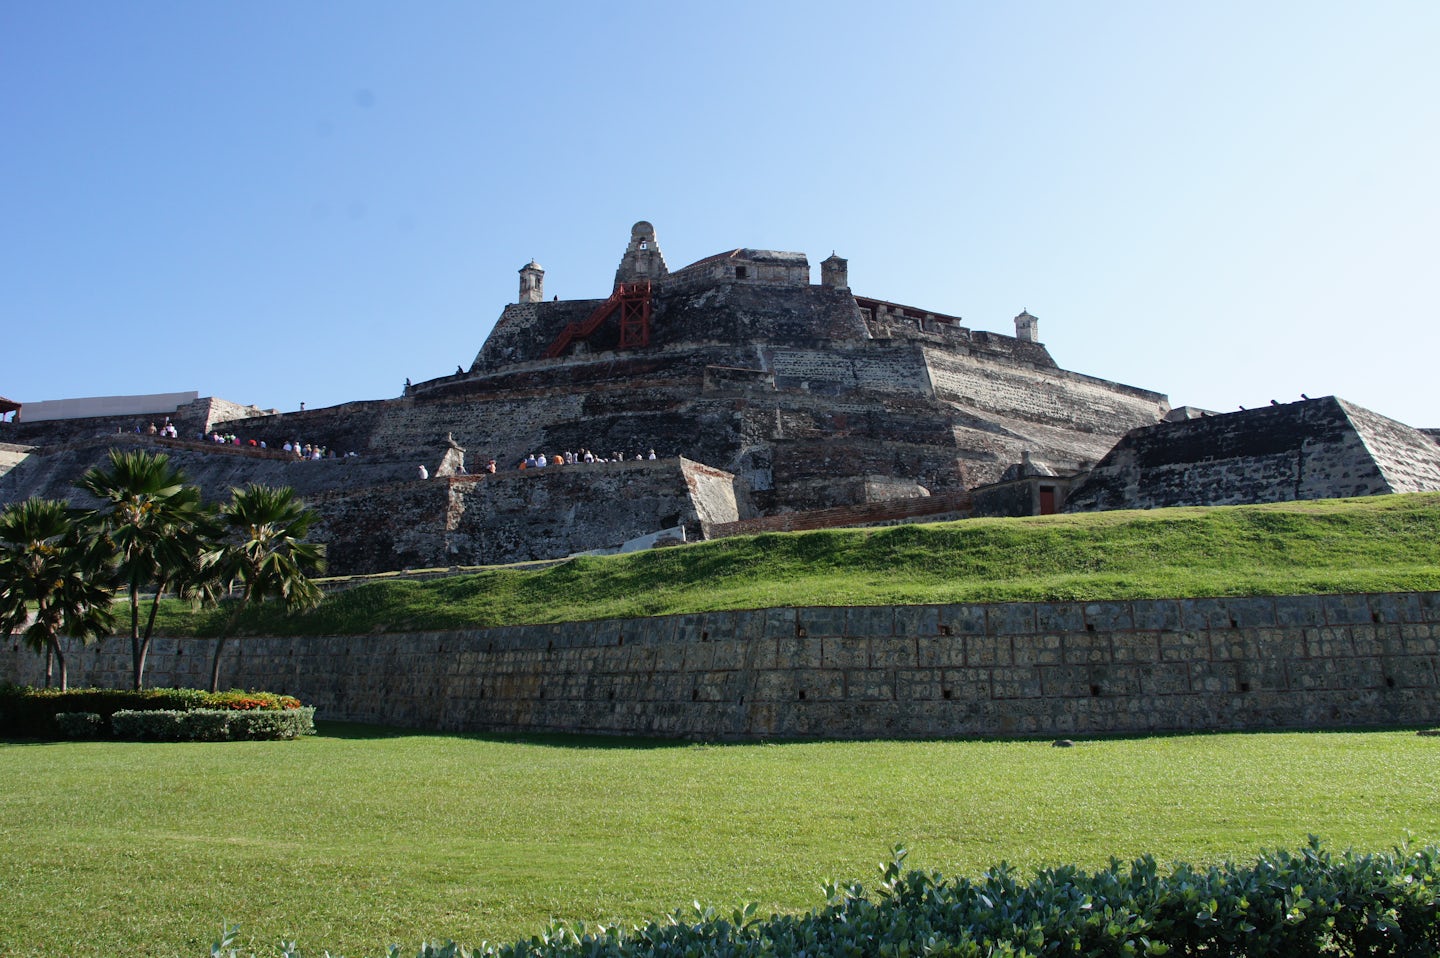 Fort in Cartagena, Colombia on the Highlights of Cartagena and Folkloric Sh